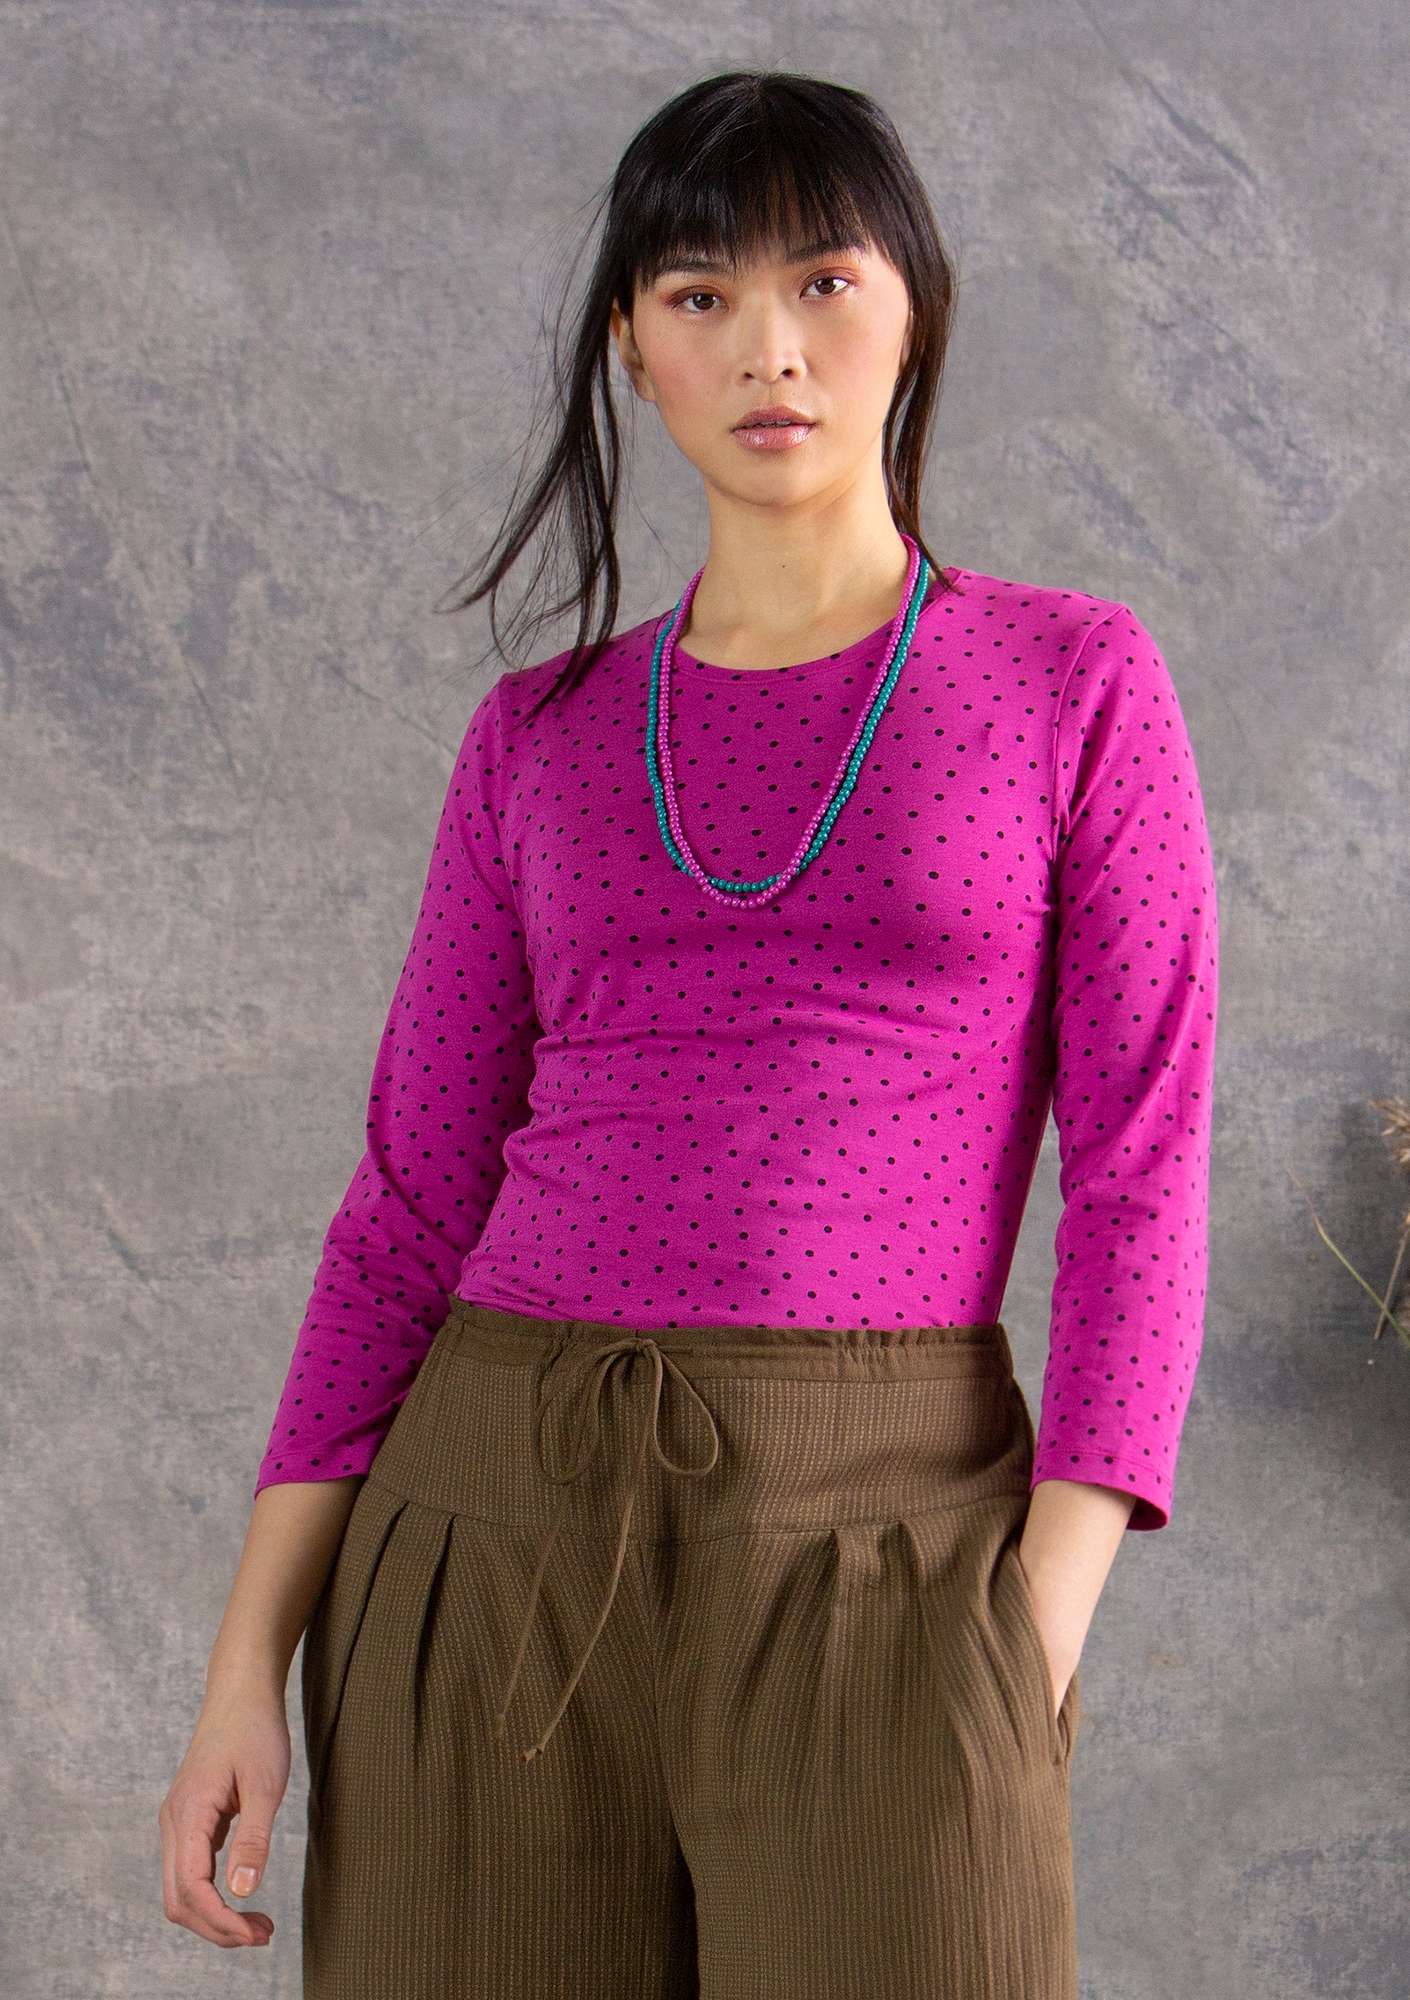 Top Pytte cochinea/patterned